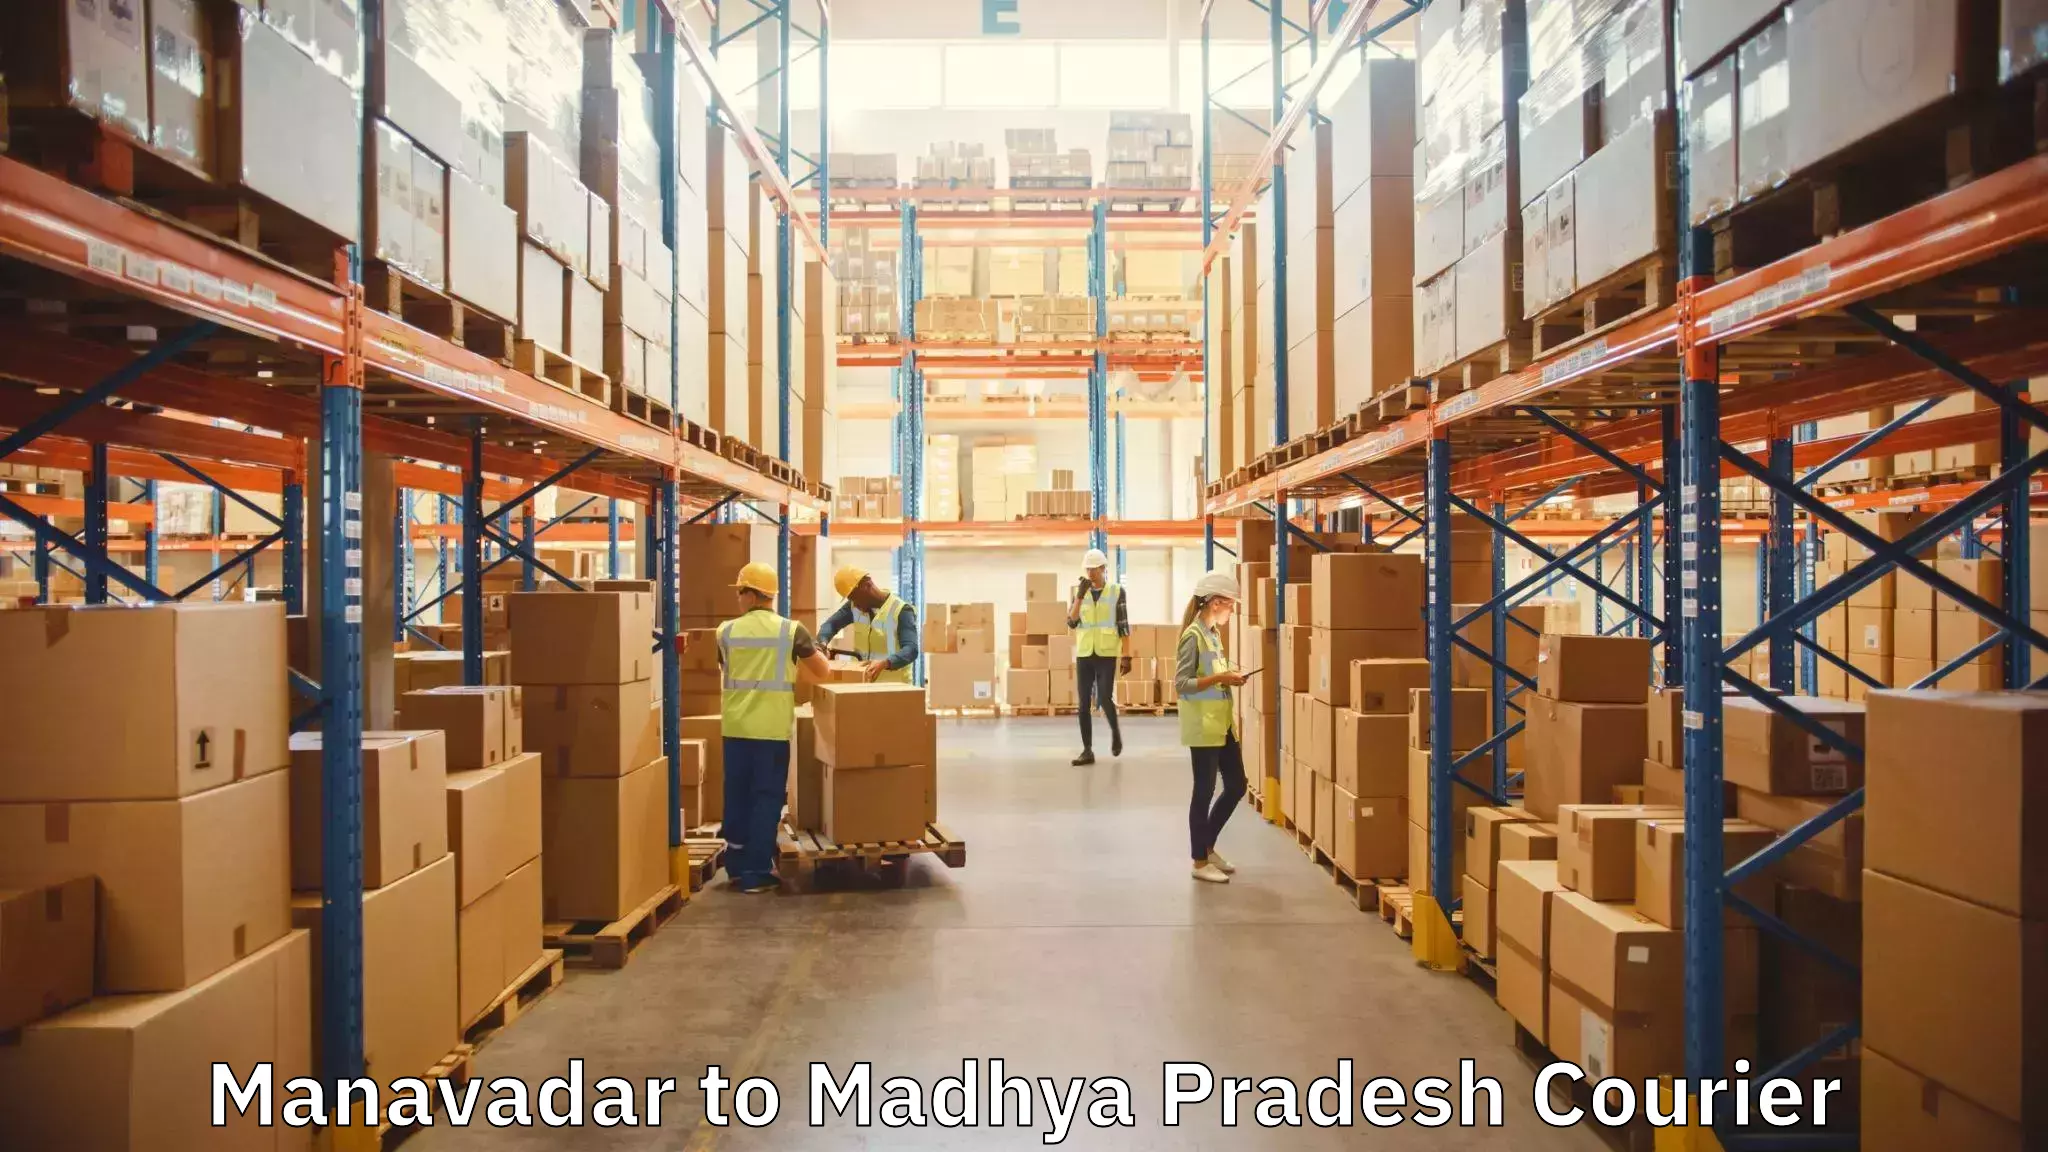 Furniture relocation experts Manavadar to Bhopal